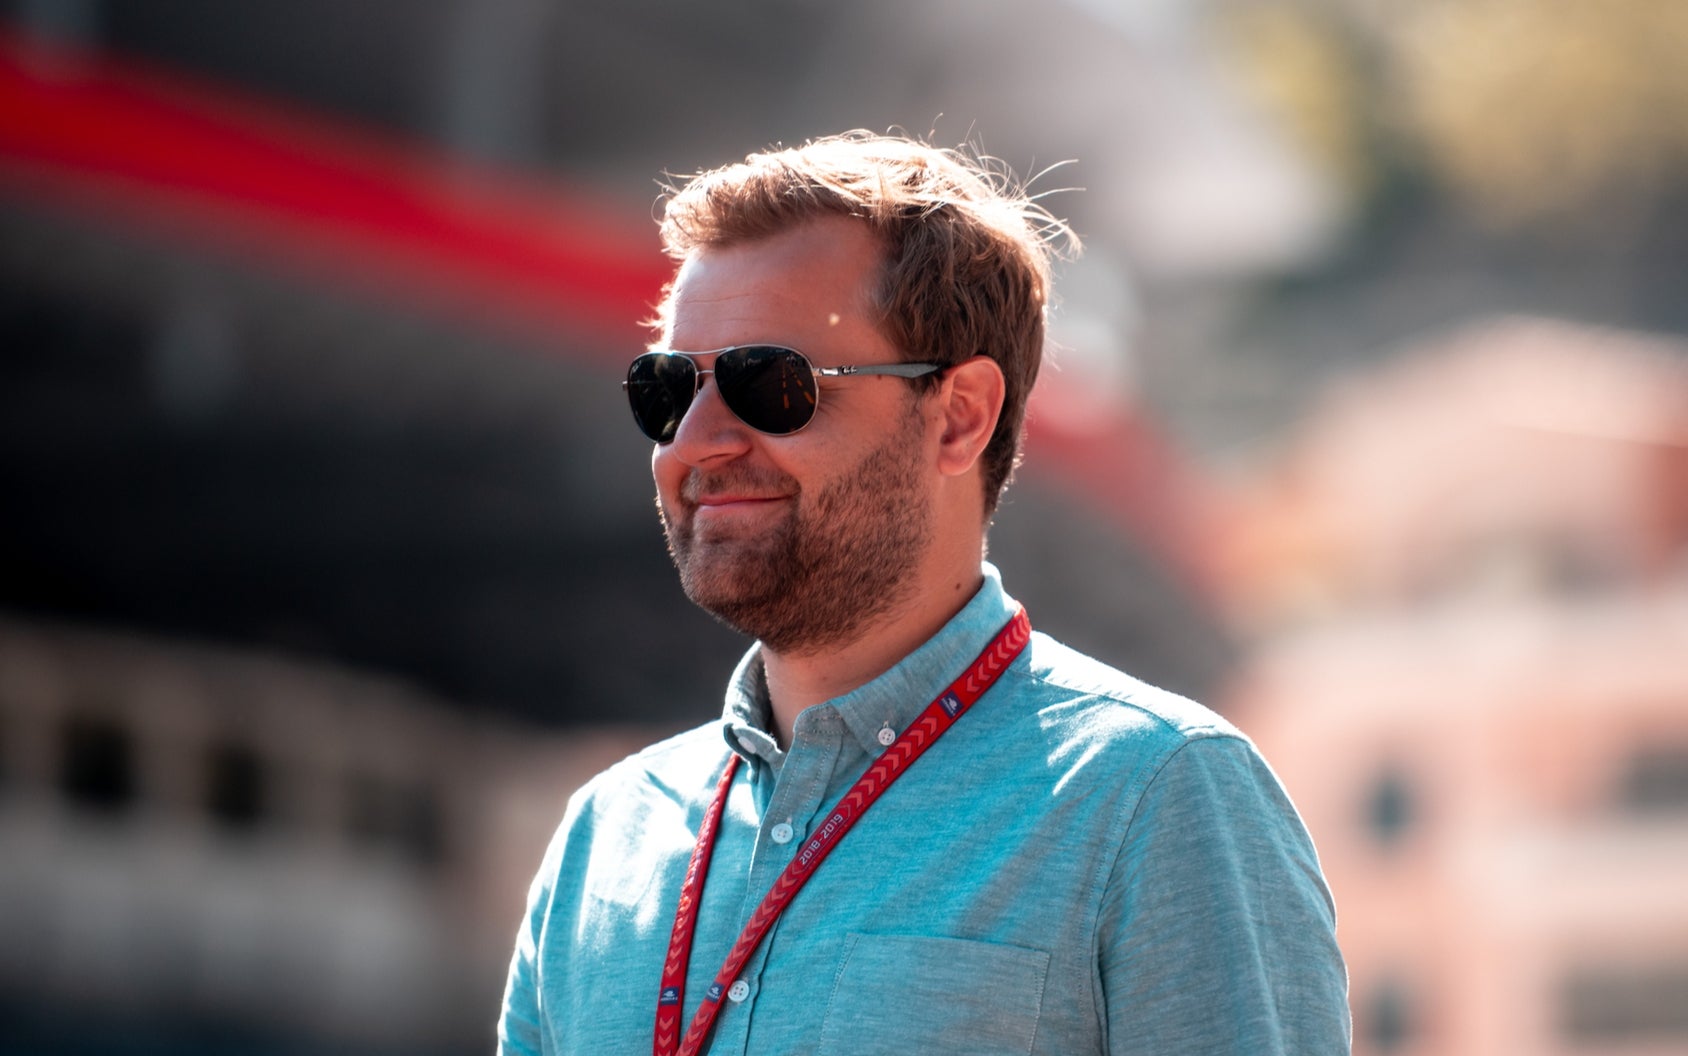 F1 commentator Jack Nicholls sacked from BBC 5 Live role after inappropriate touching in Formula E job The Independent